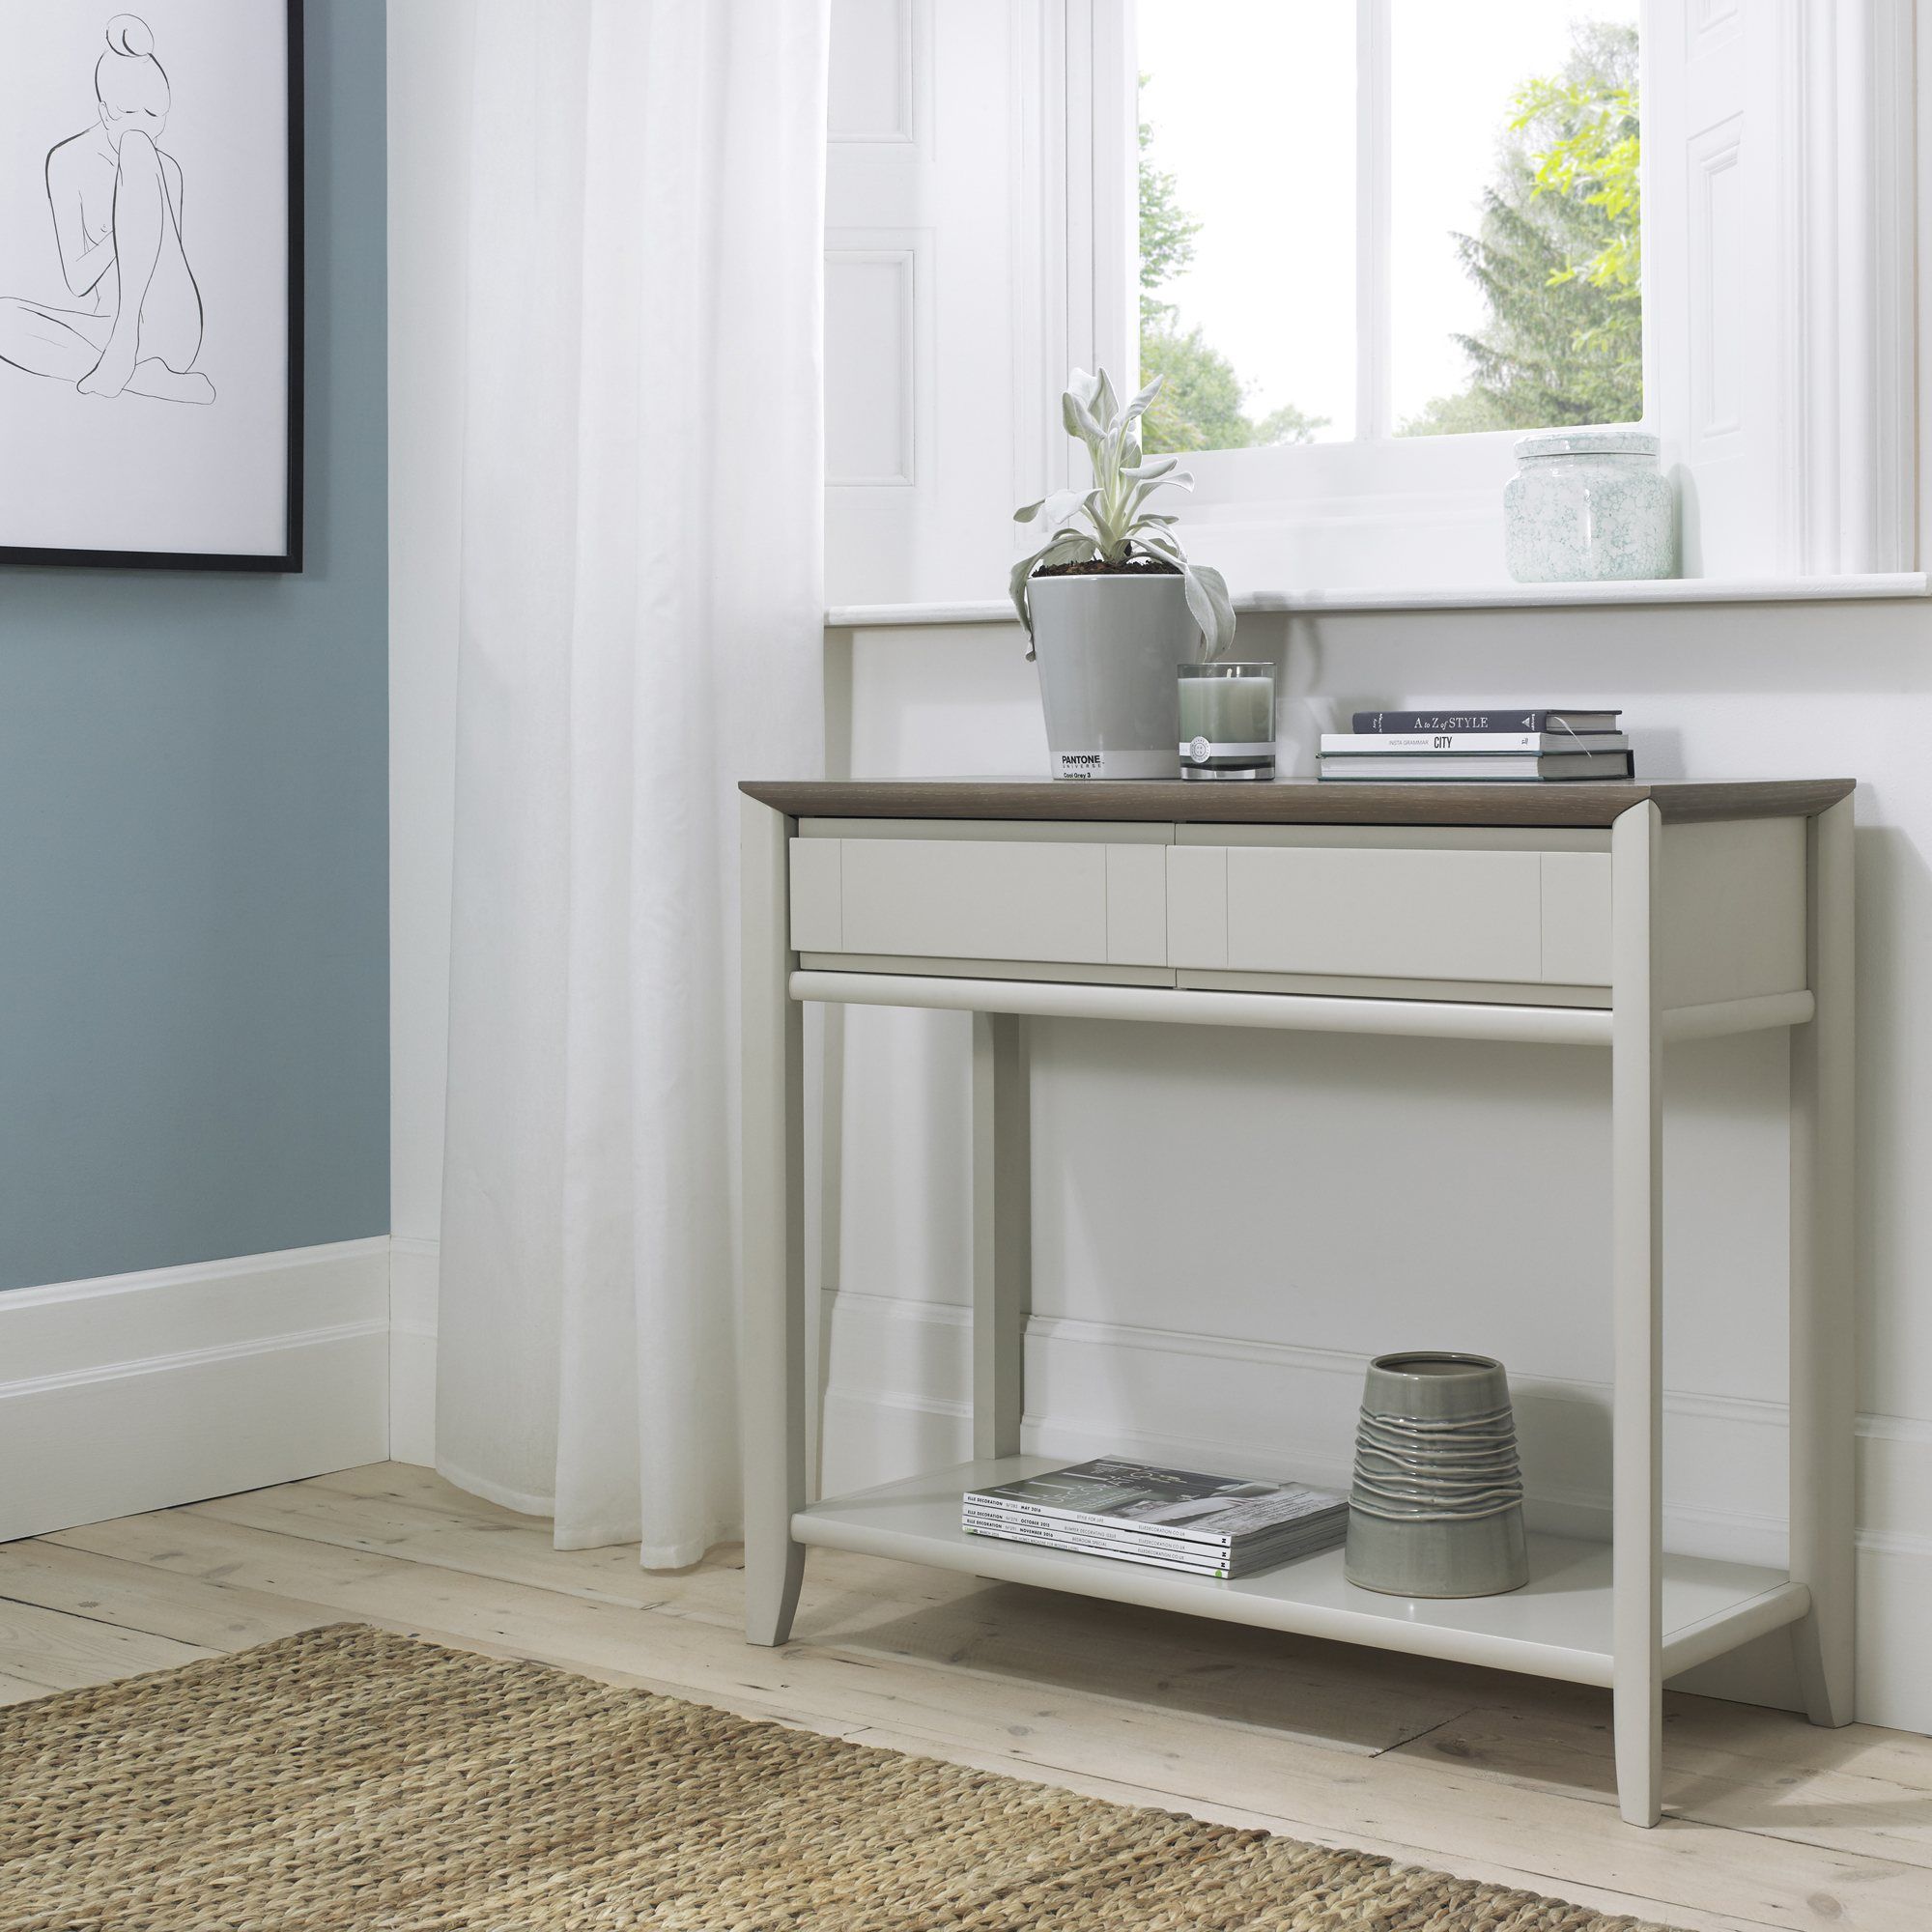 Premier Collection Bergen Grey Washed Oak & Soft Grey Console Table Intended For Gray Wood Veneer Console Tables (View 2 of 20)